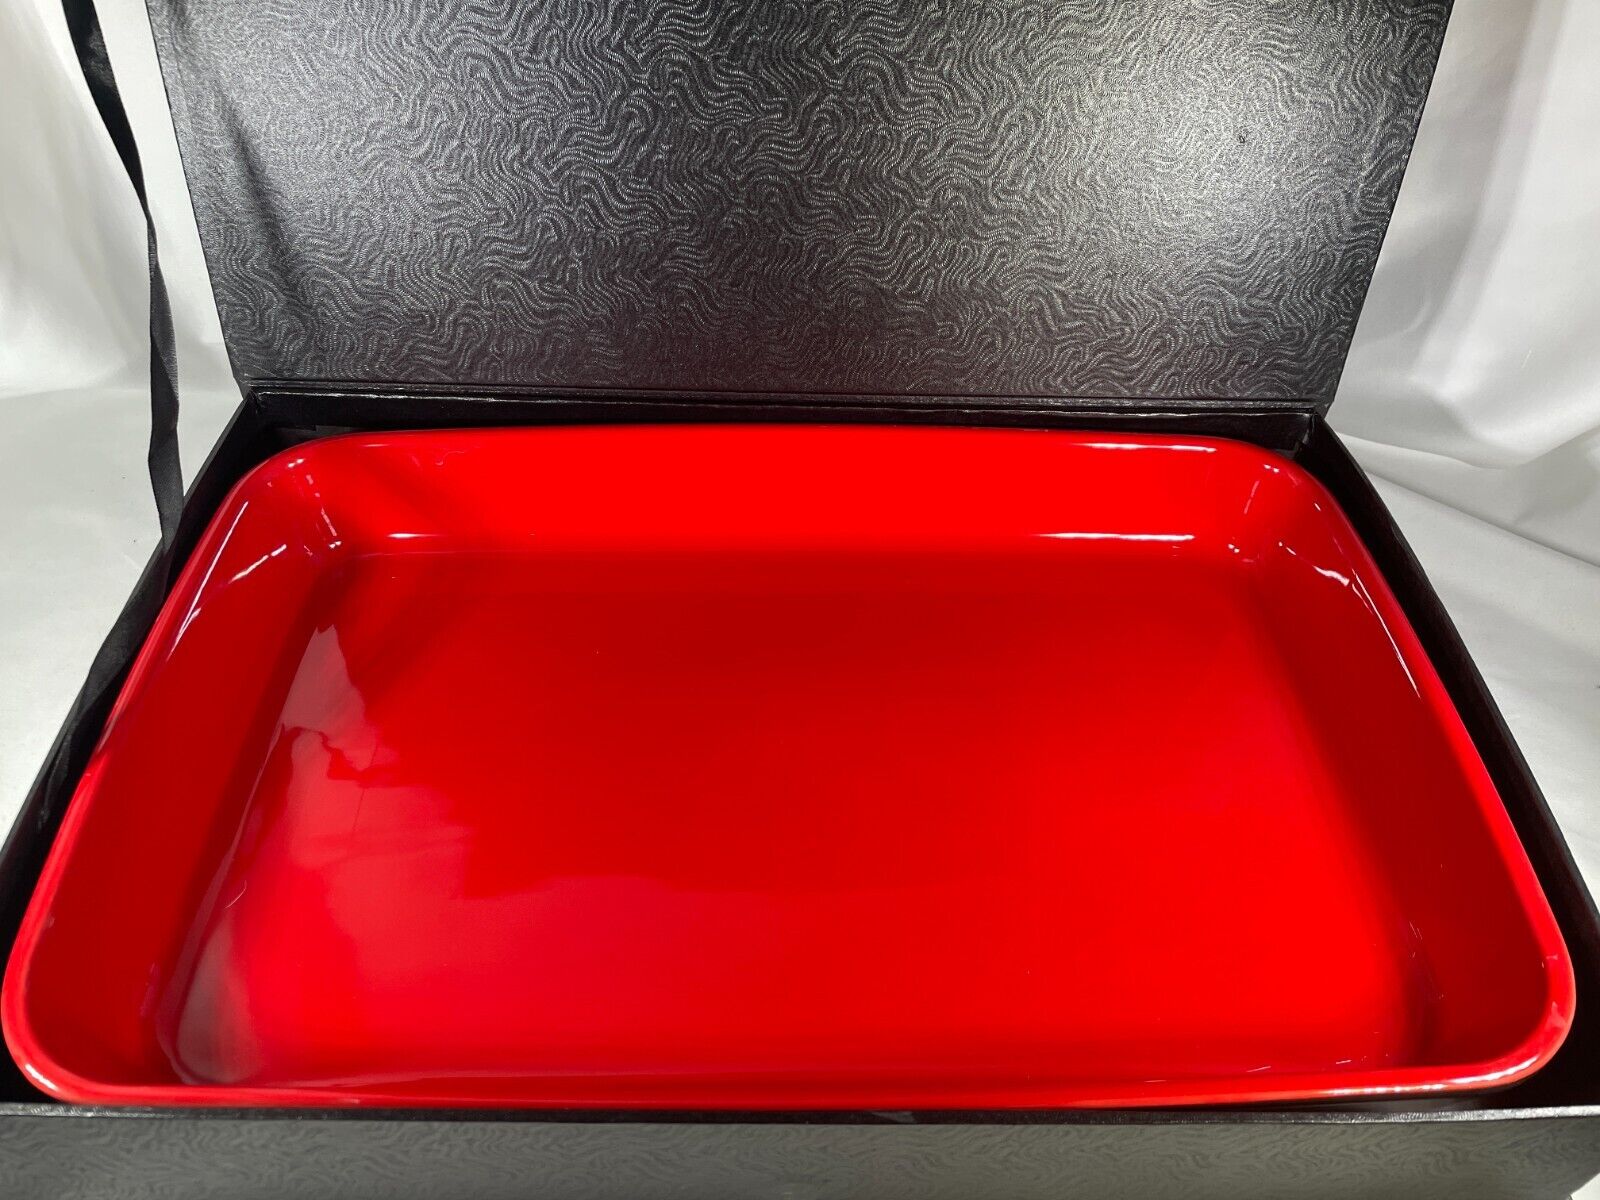 Exquisite Black & Red Serving Tray - Elegant Design, Glossy Finish, Perfect for